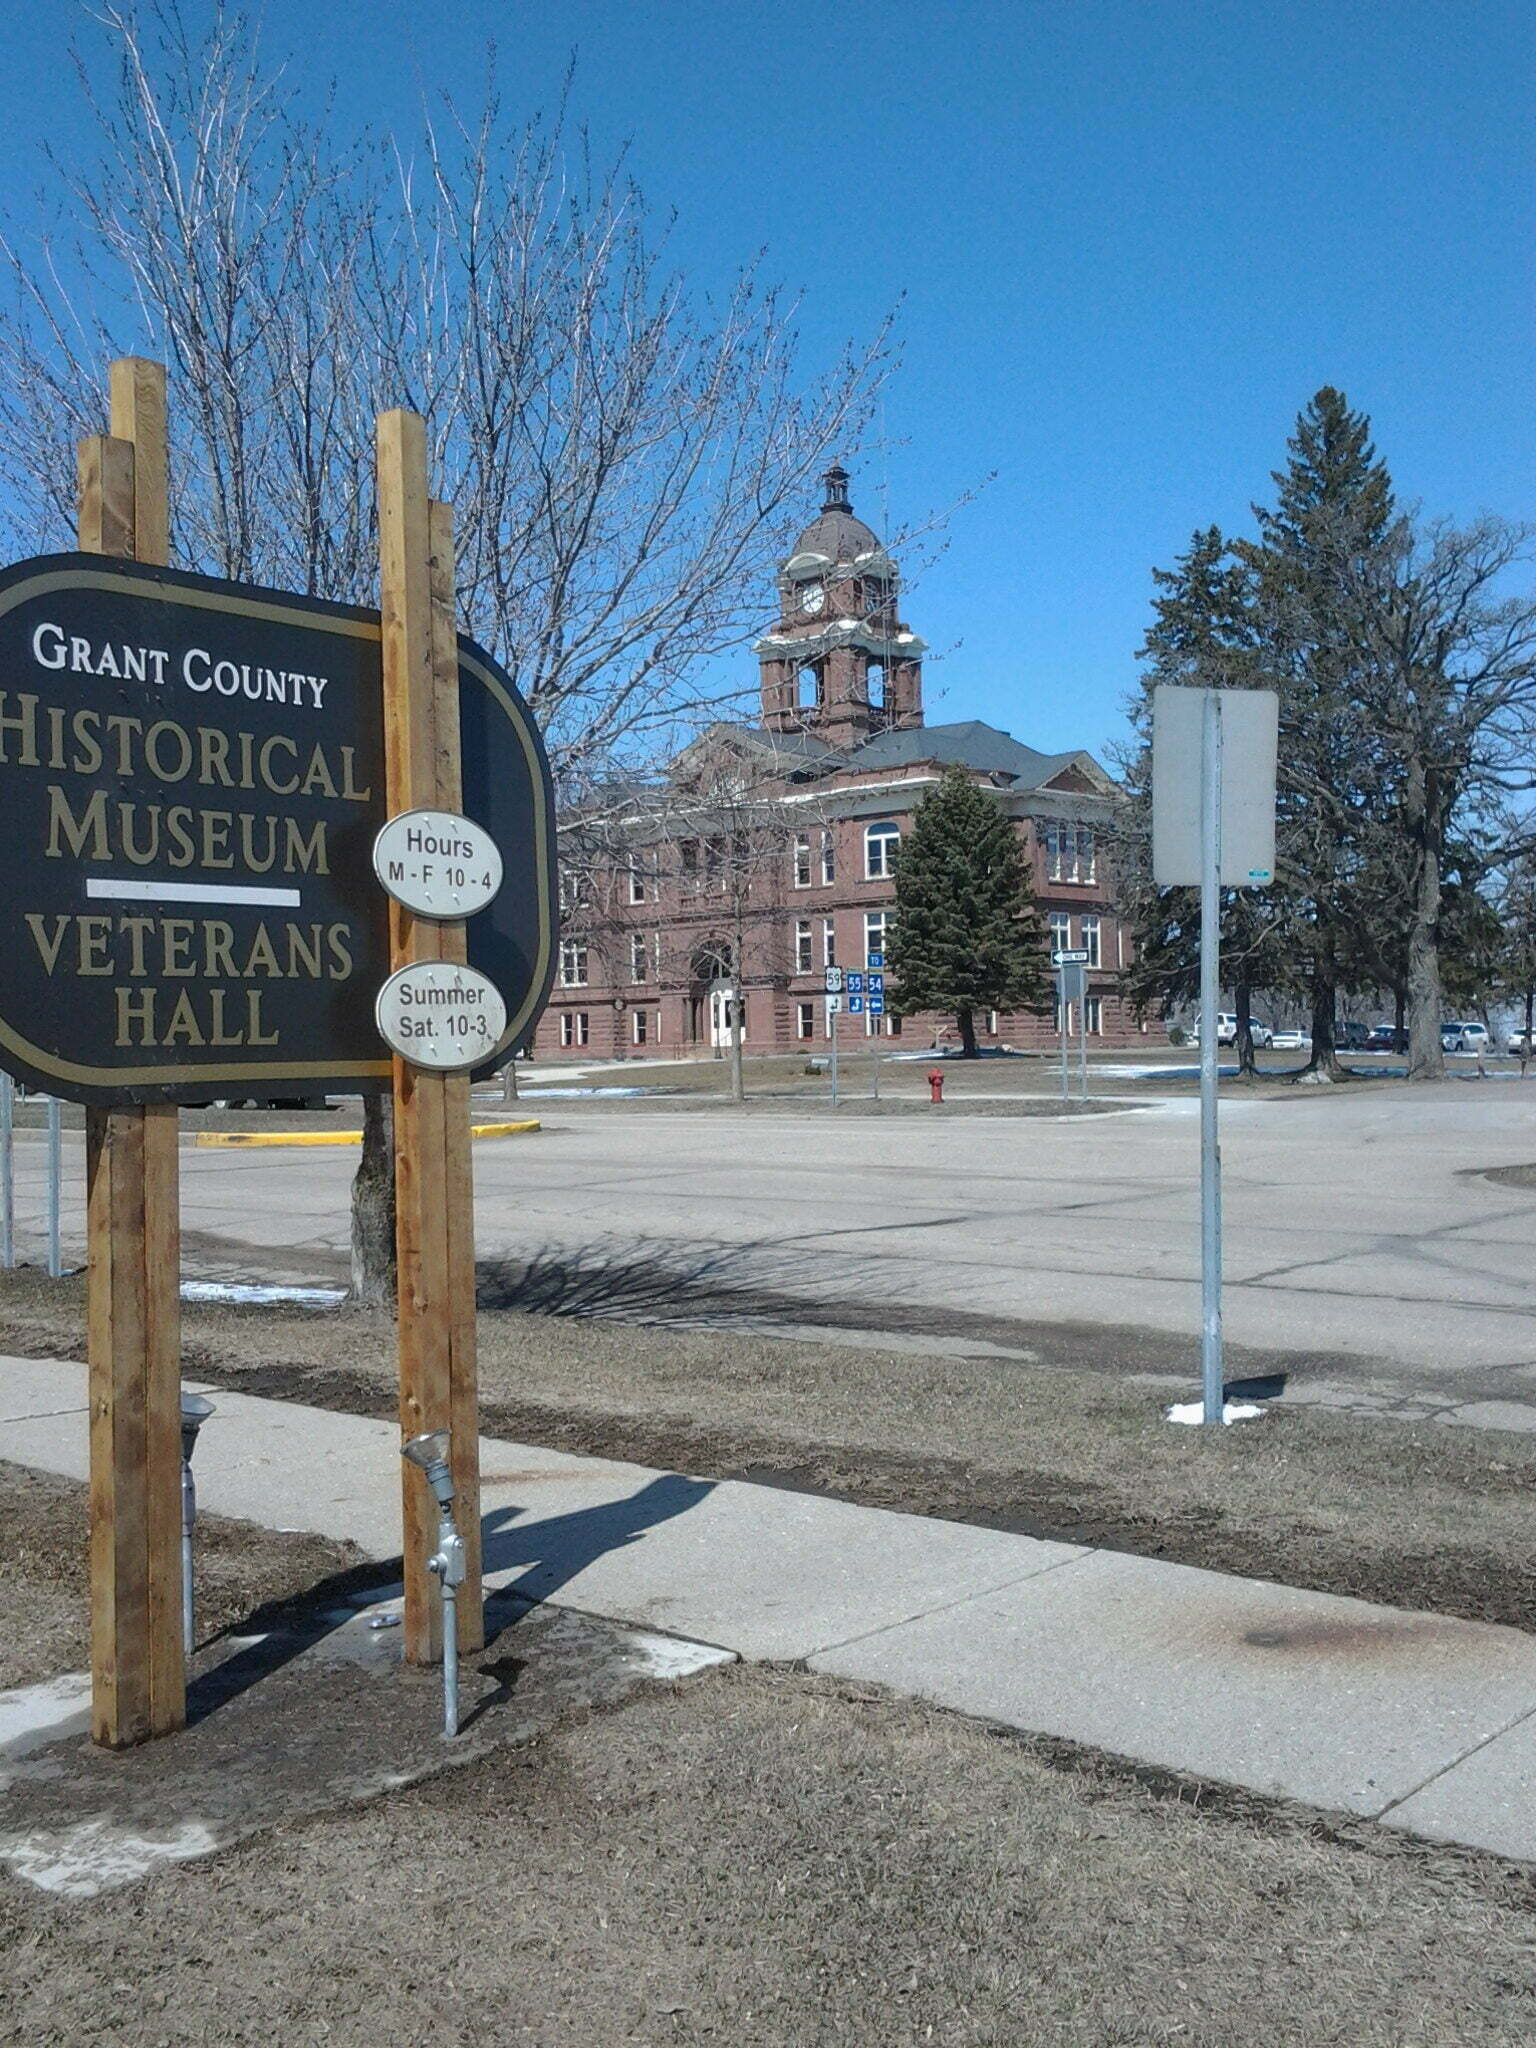 Grant County Museum in Elbow Lake, Minnesota